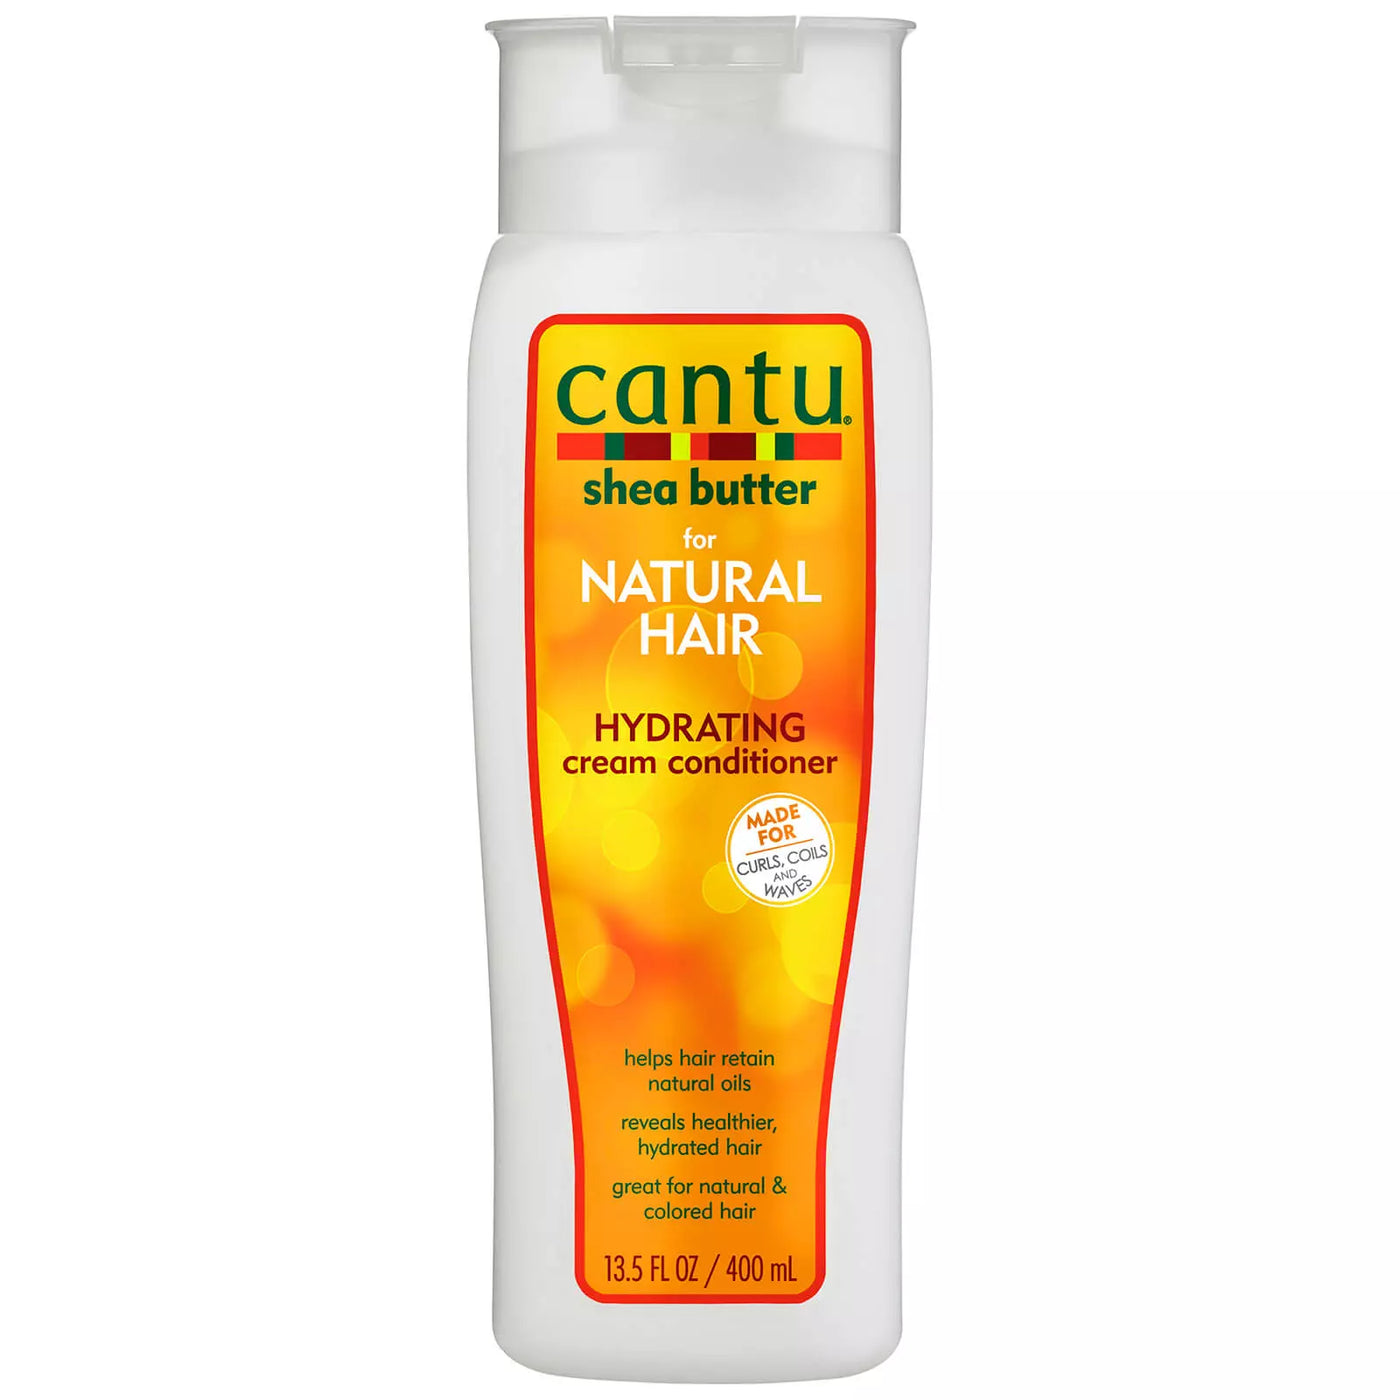 Natural Hair Hydrating Cream Conditioner